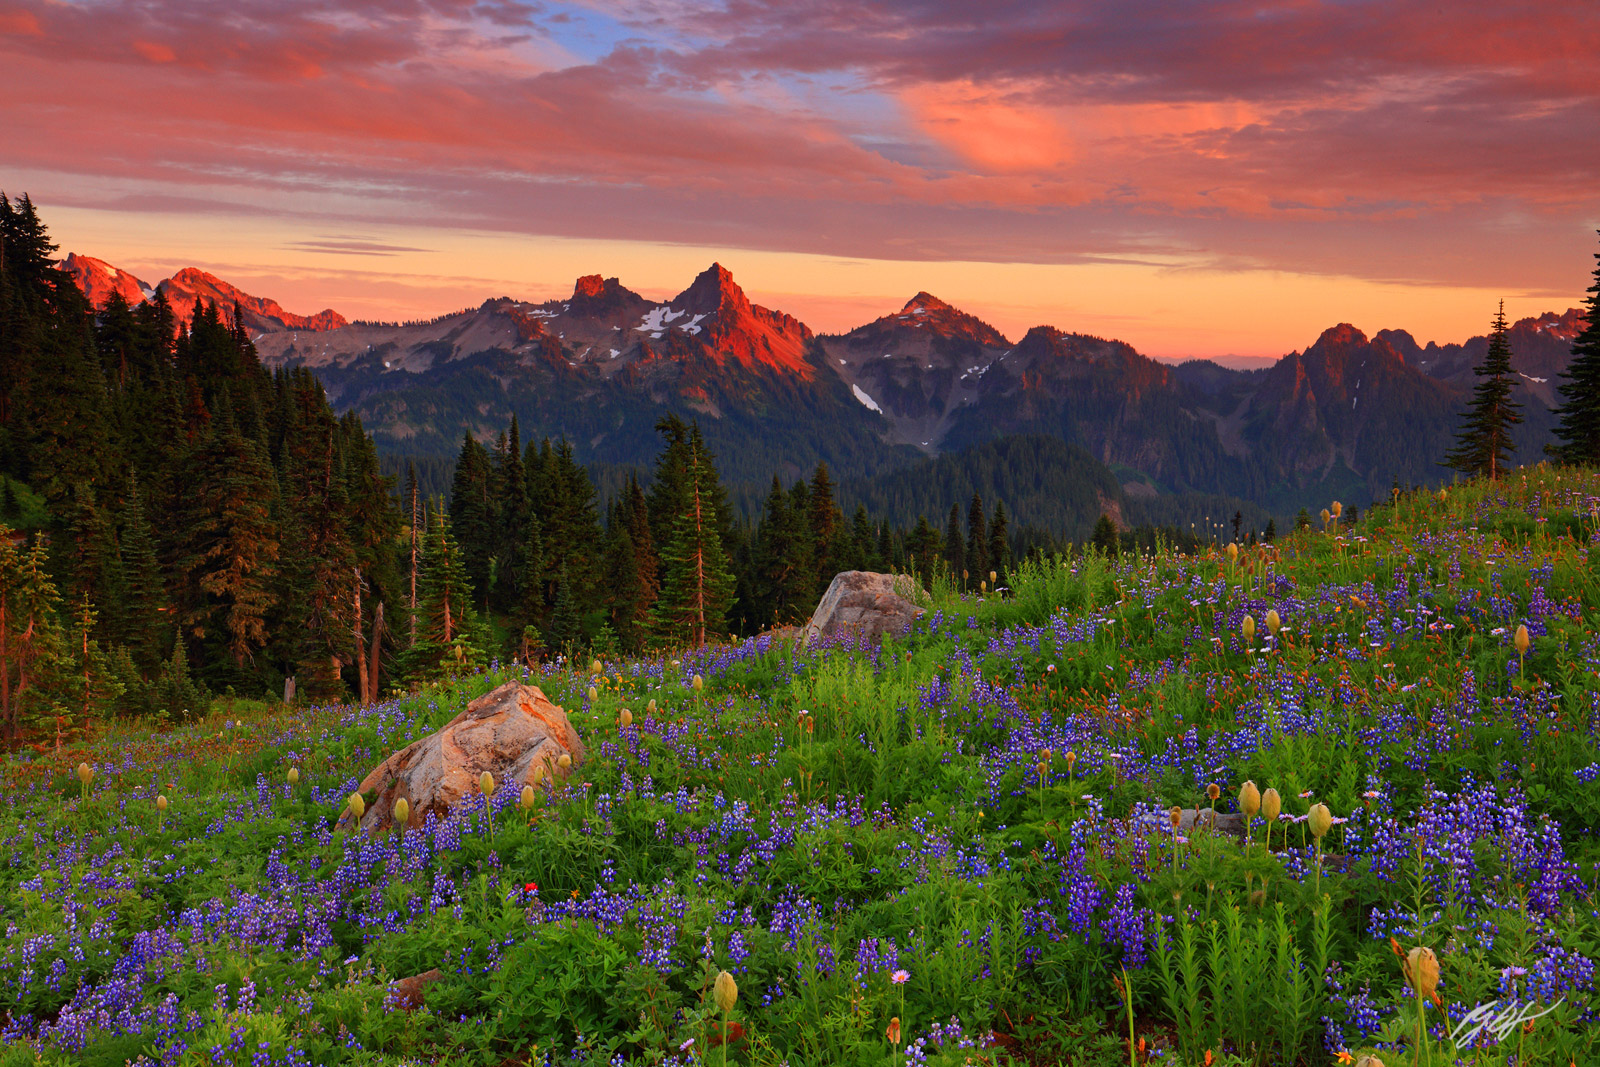 Sunset Wildflowers and the Tatoosh Range from Paradise Meadows in Mt Rainier National Park in Washington